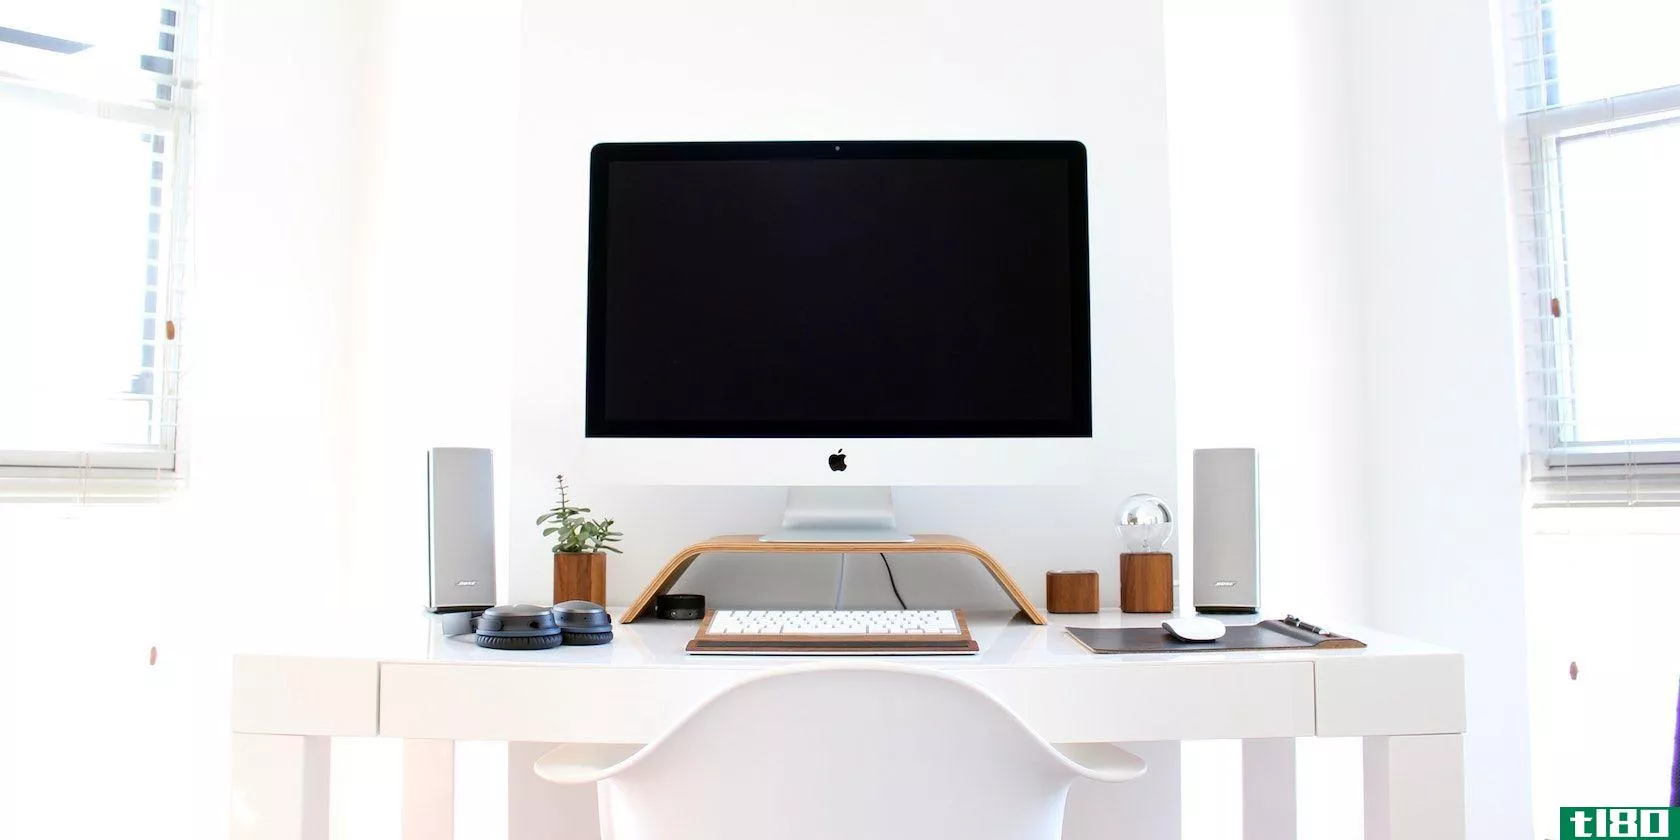 A photograph of a desktop iMac on an organised desk, in a white room with white furniture